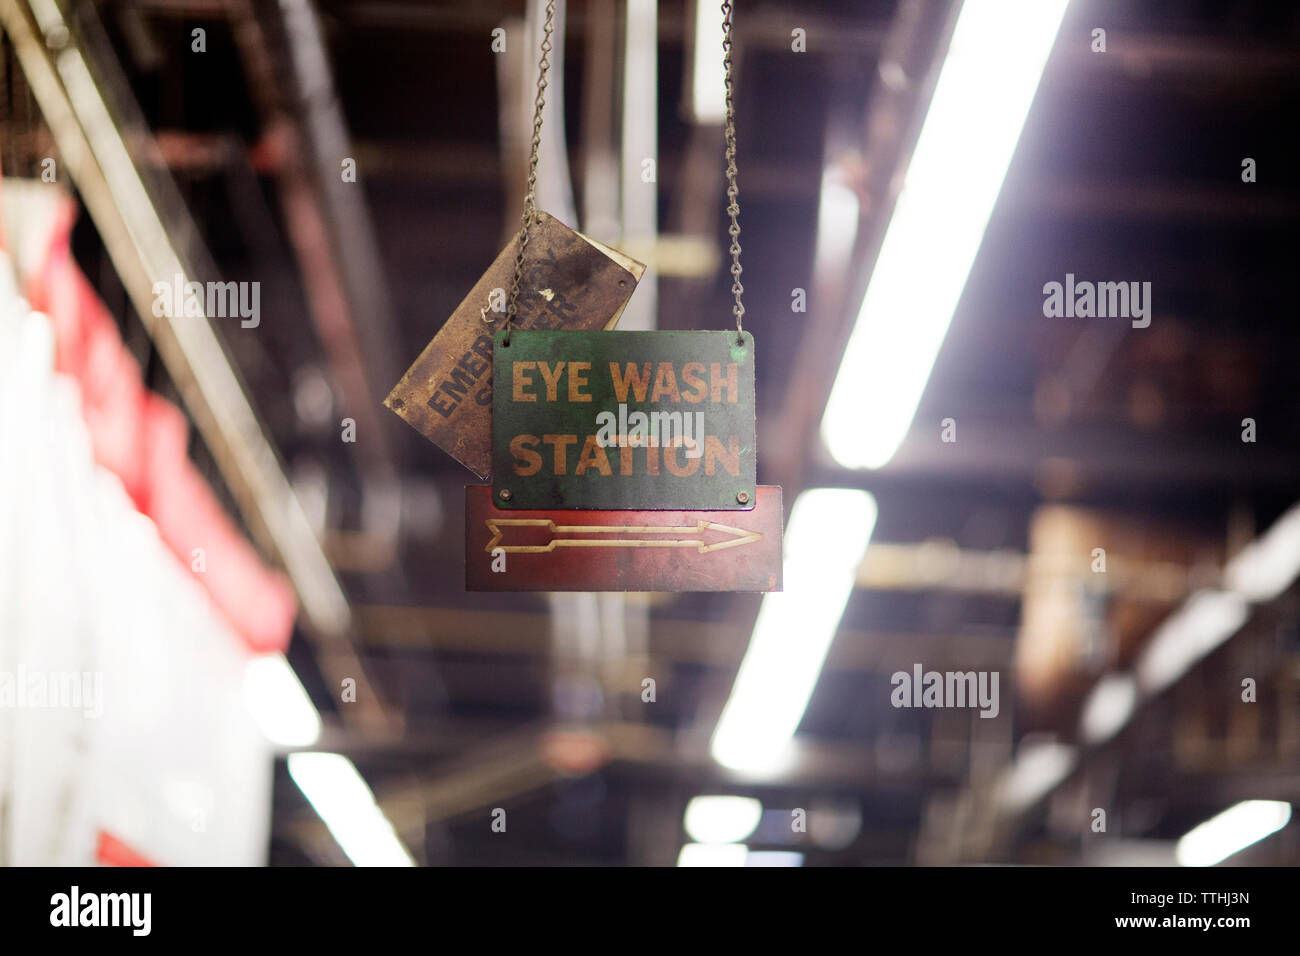 Signboard hanging in factory Stock Photo